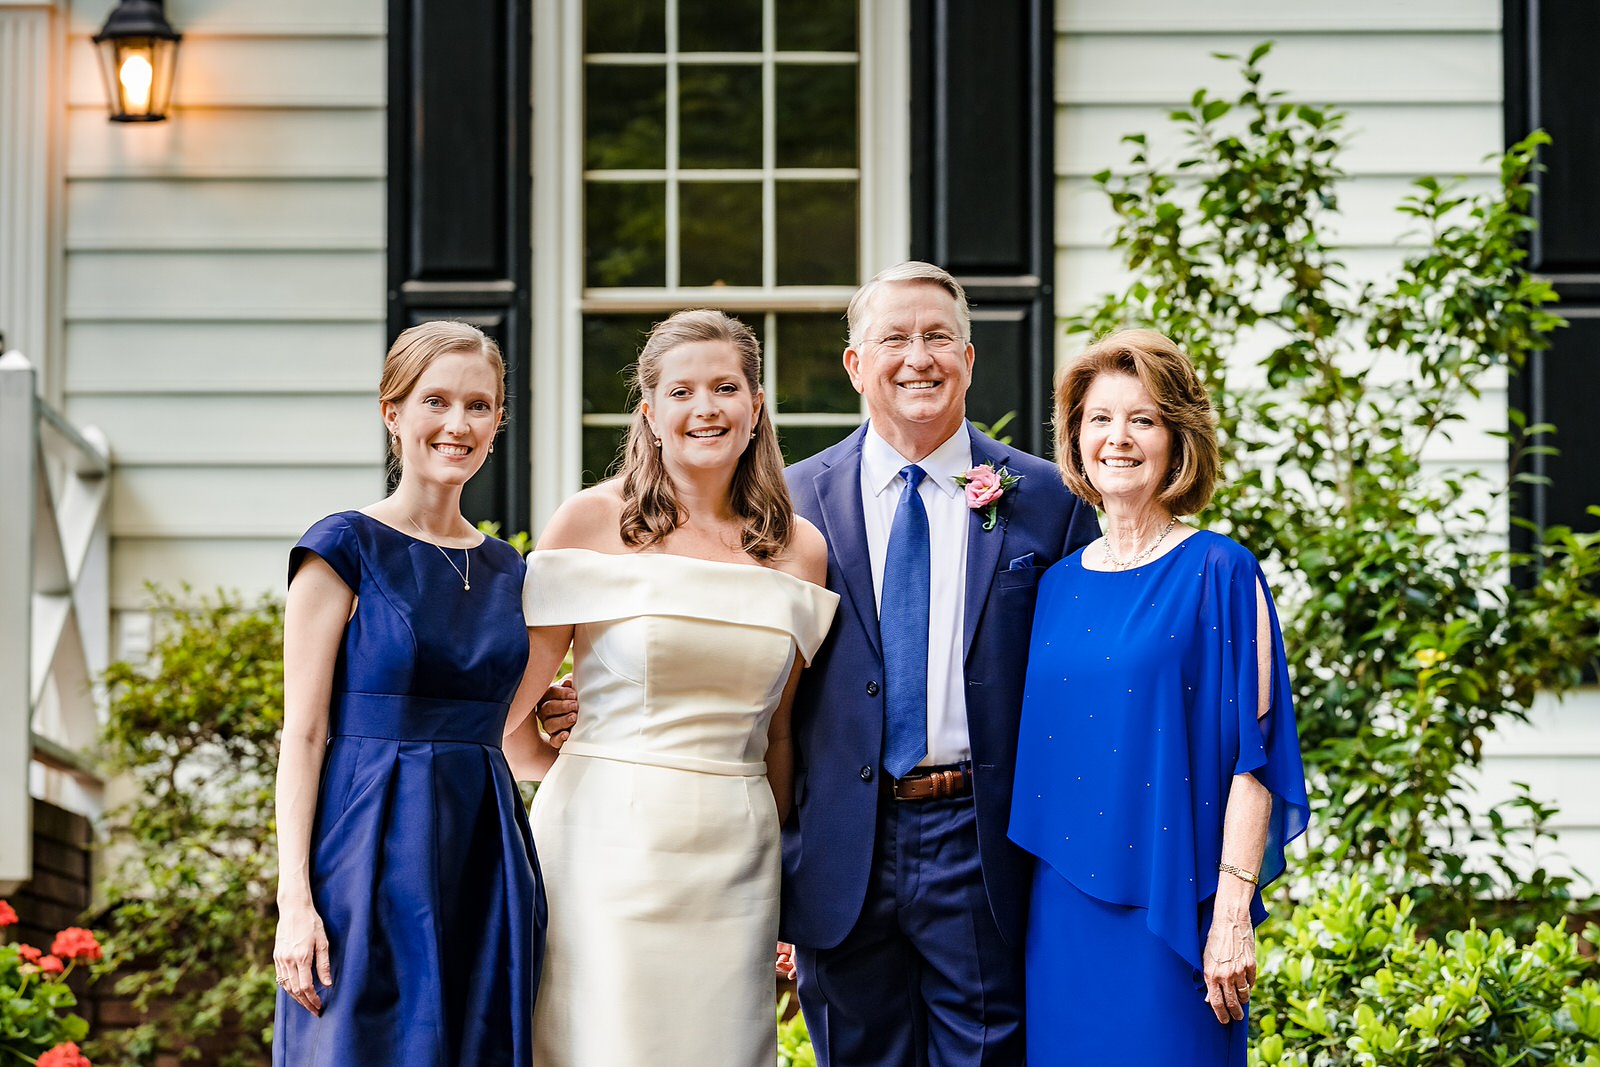 Bride poses with her parents and her sister, the maid of honor